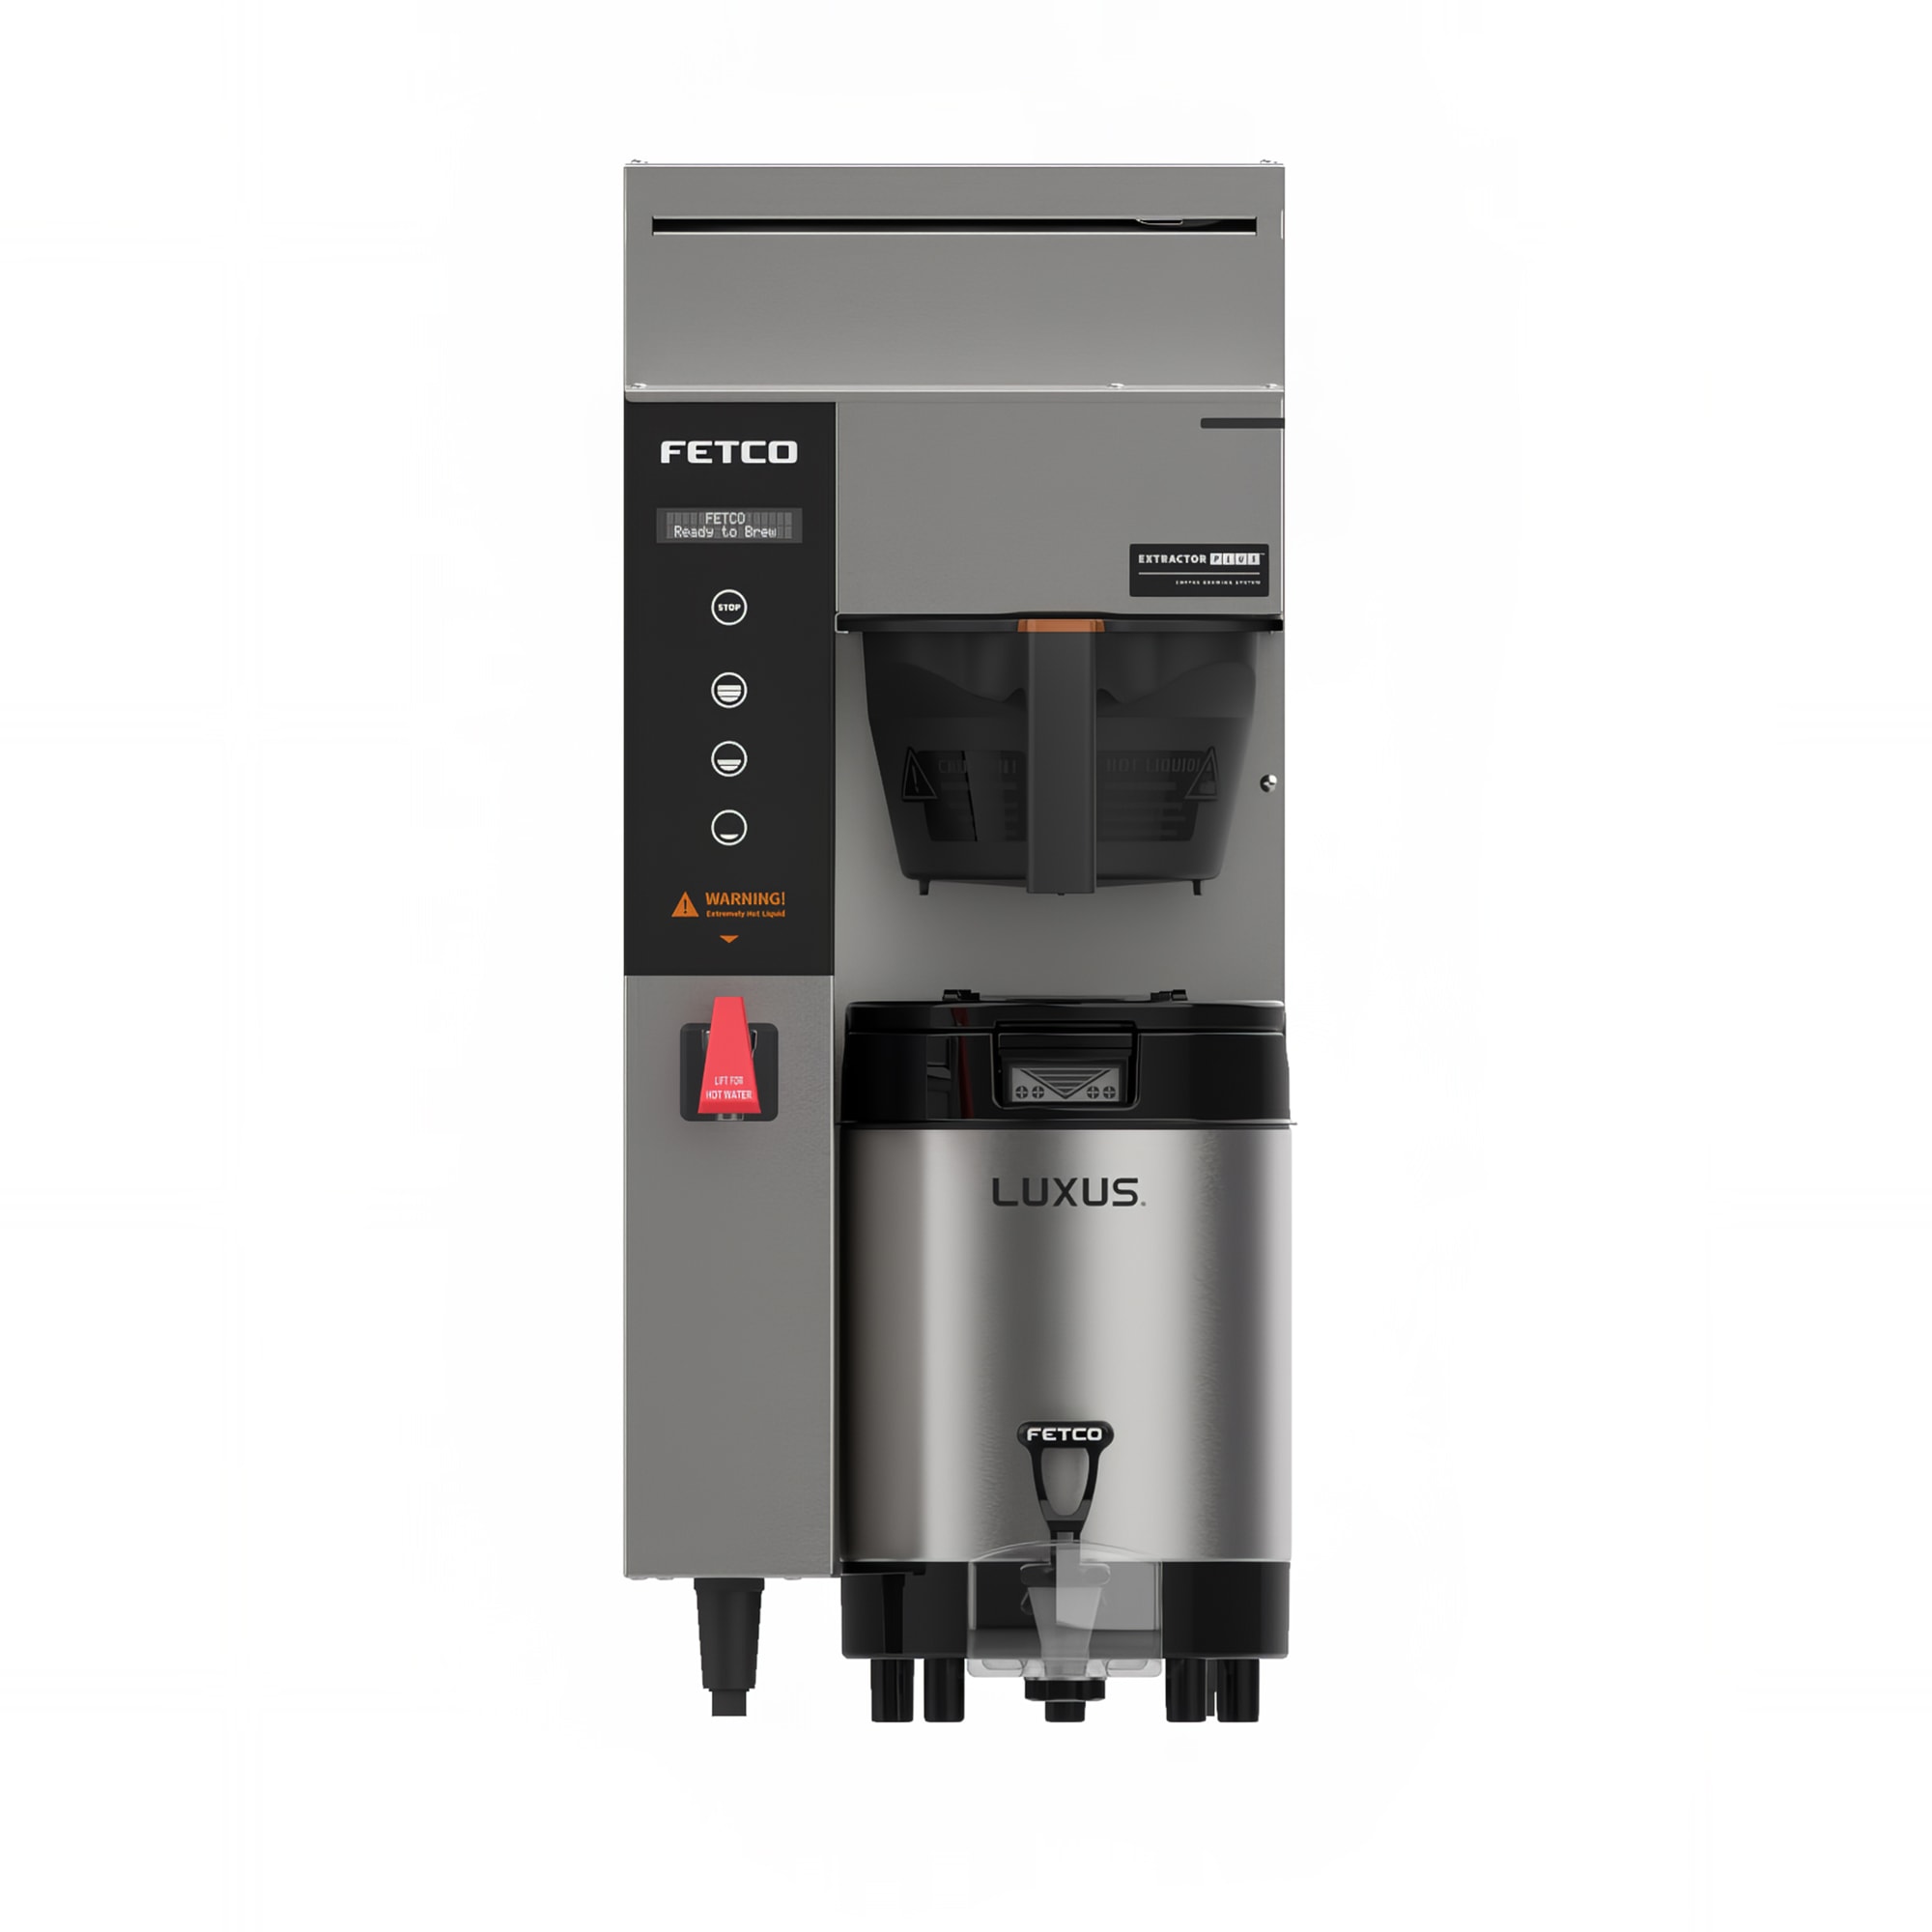 Category: Coffee Makers - First Coffee, Then…